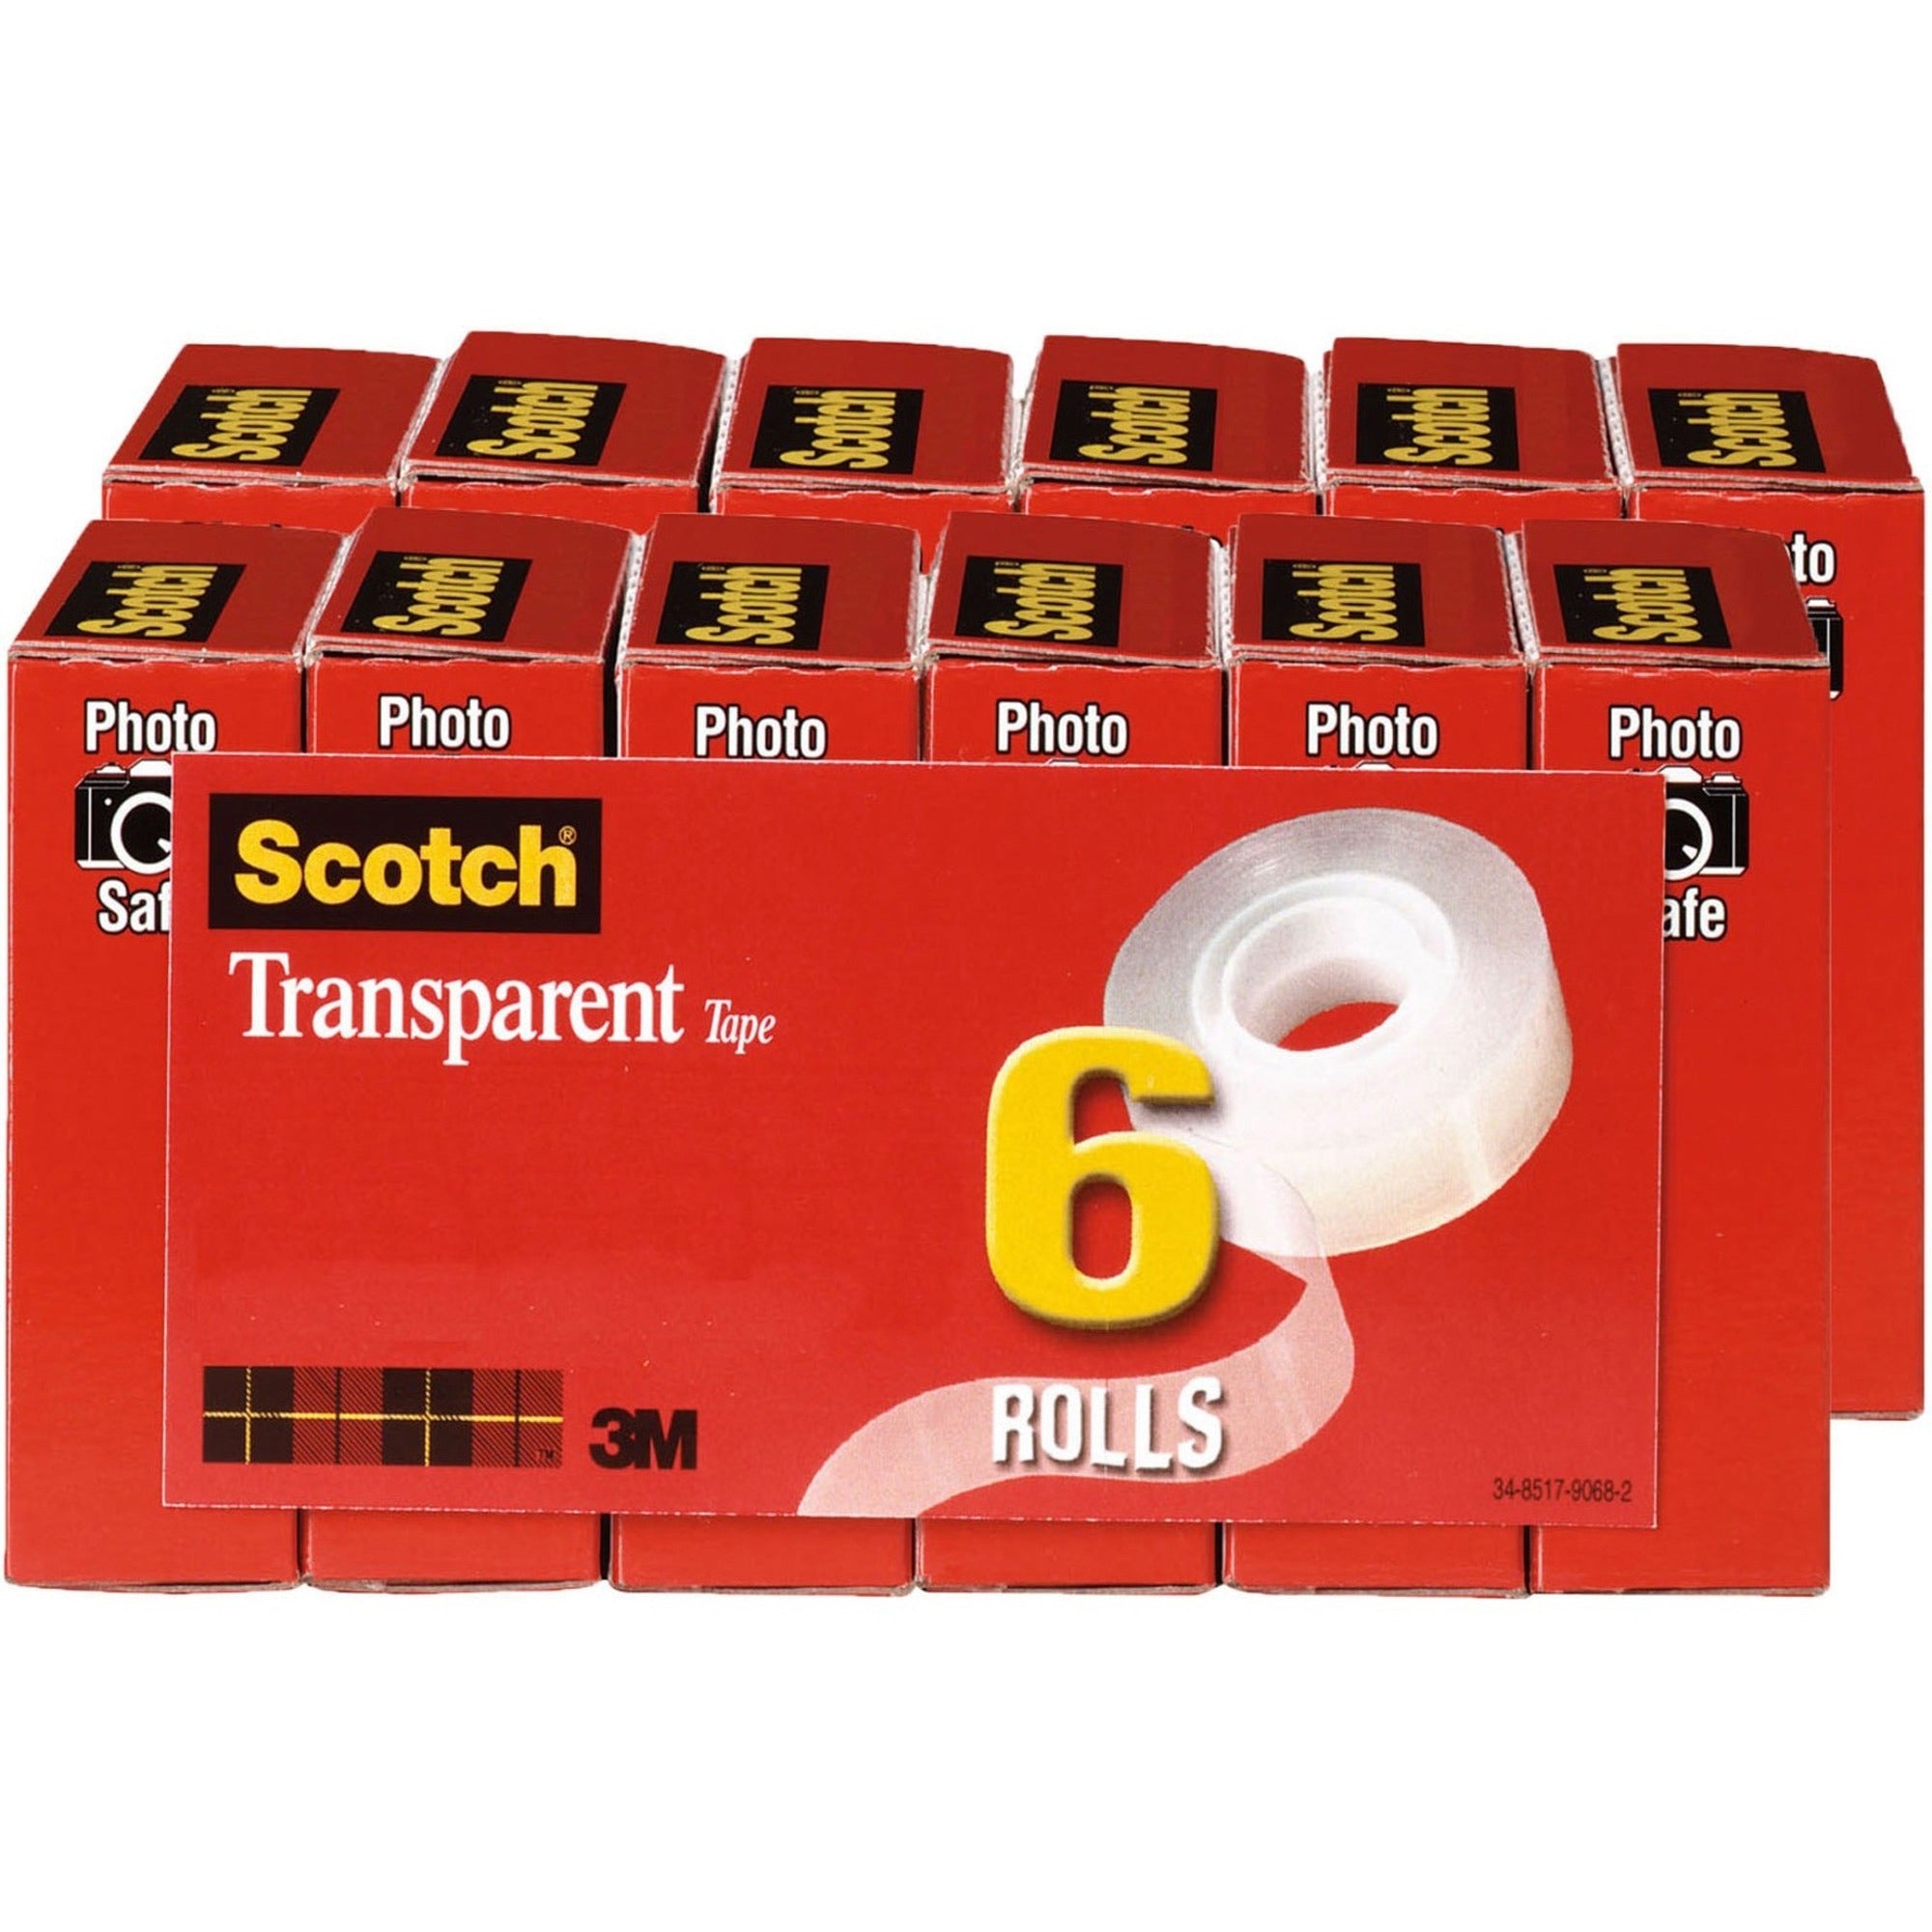 scotch-transparent-tape-3-4w-36-yd-length-x-075-width-1-core-stain-resistant-moisture-resistant-long-lasting-for-wrapping-sealing-mending-label-protection-12-bundle-clear_mmm6006pkbd - 1